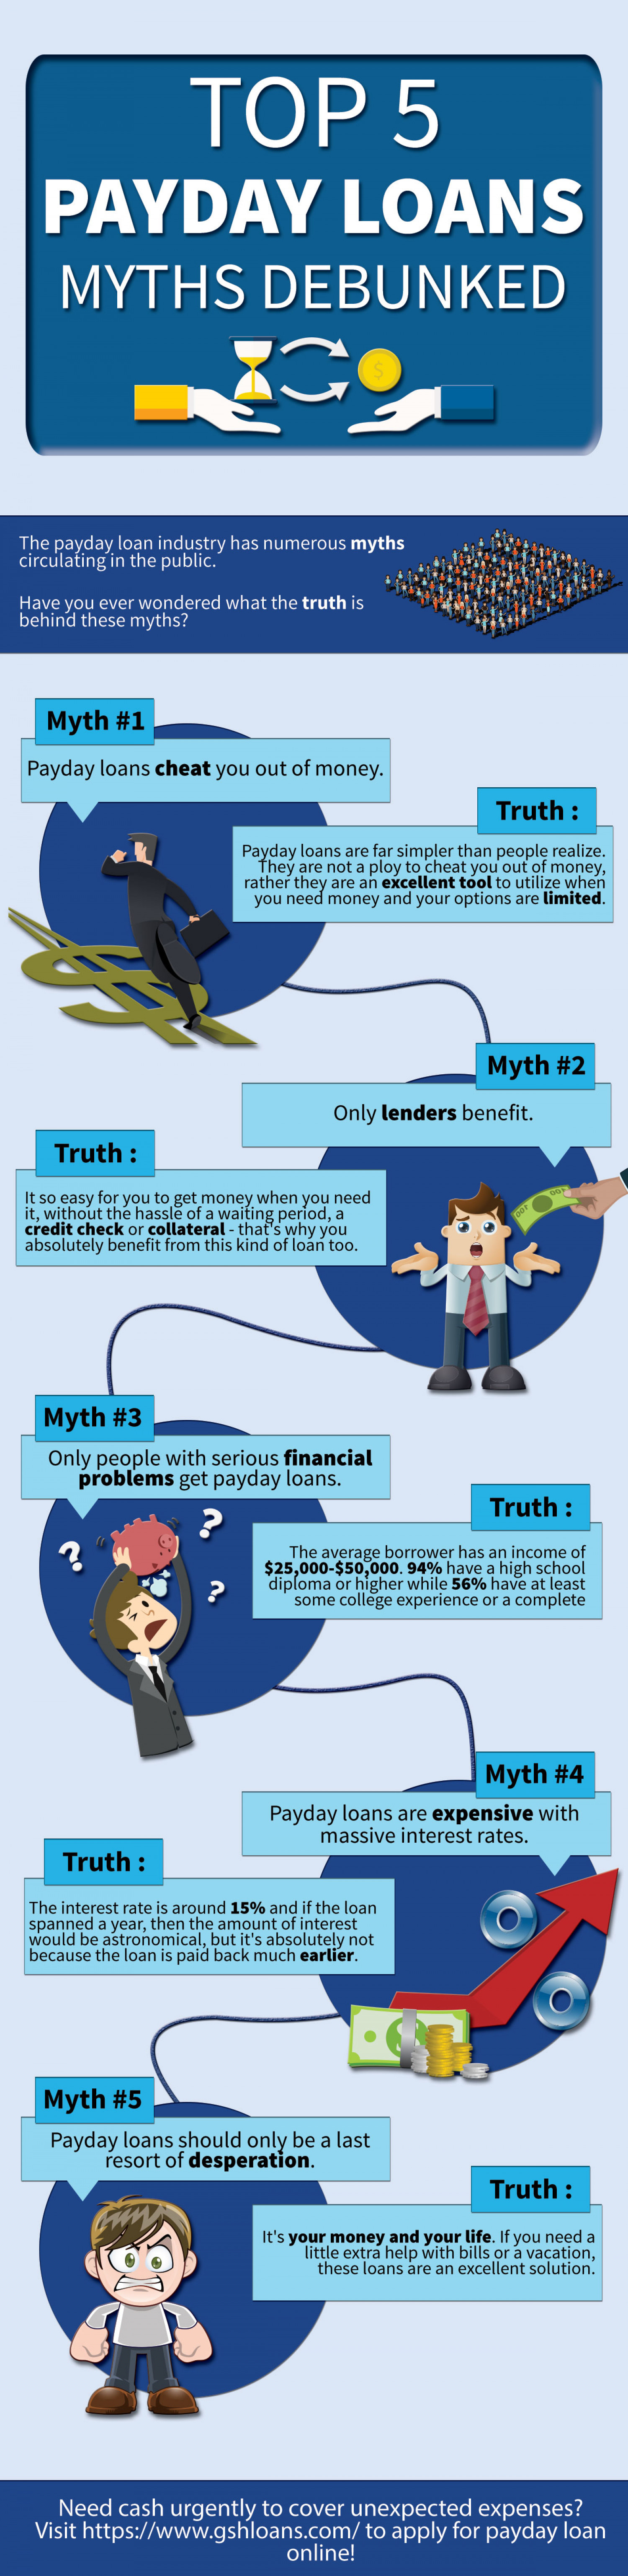 Top 5 Payday Loans Myths Debunked Infographic